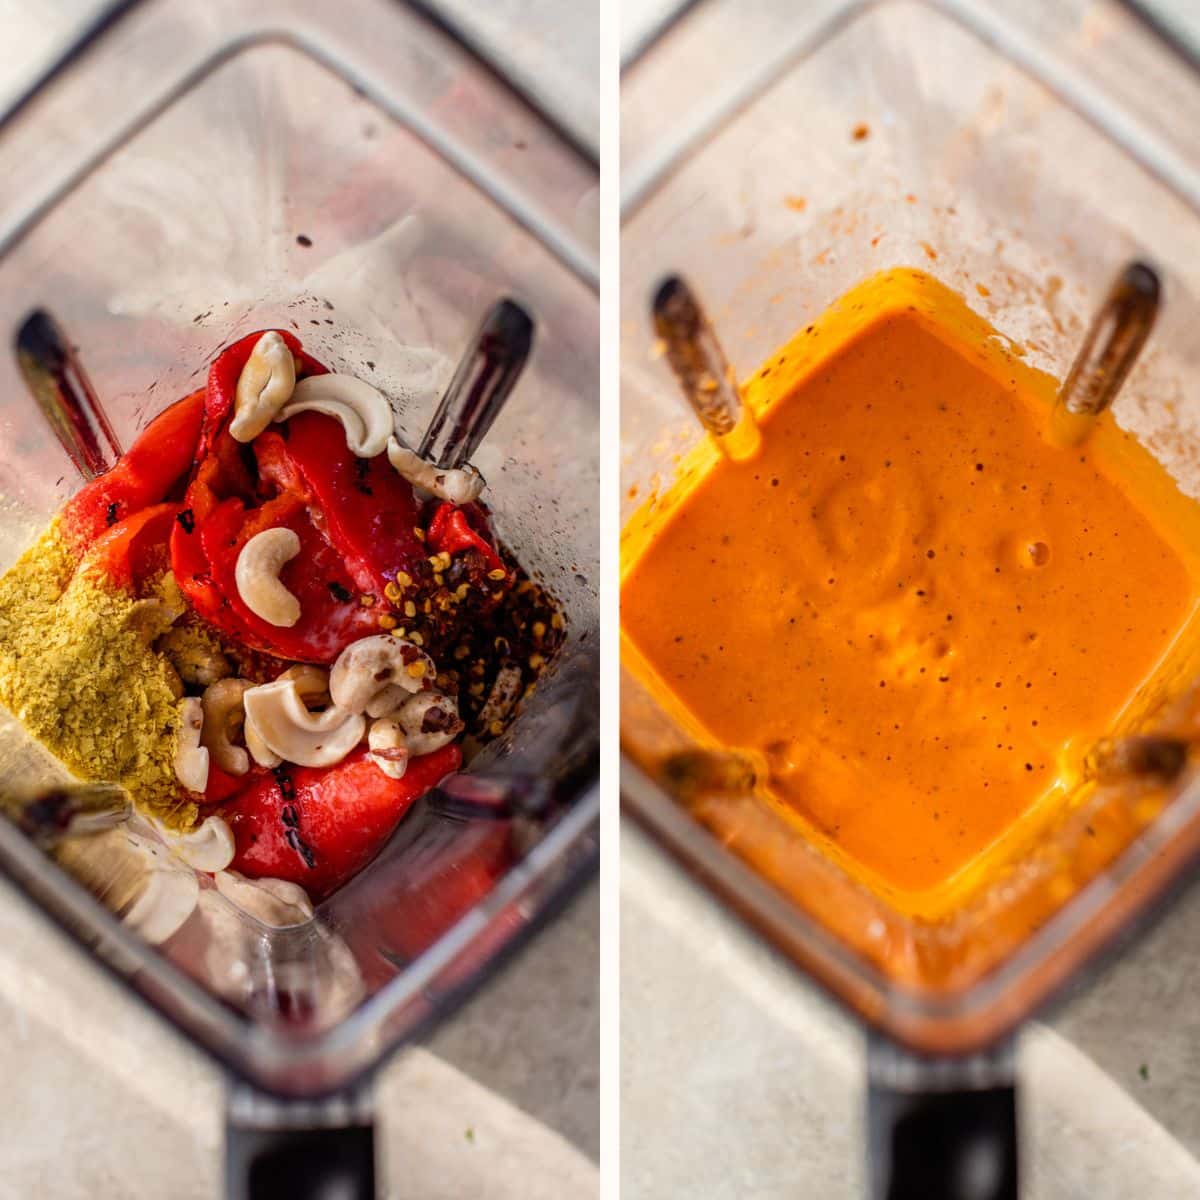 red peppers, cashews and nutritional yeast in a blender on the left and blended into sauce on the right